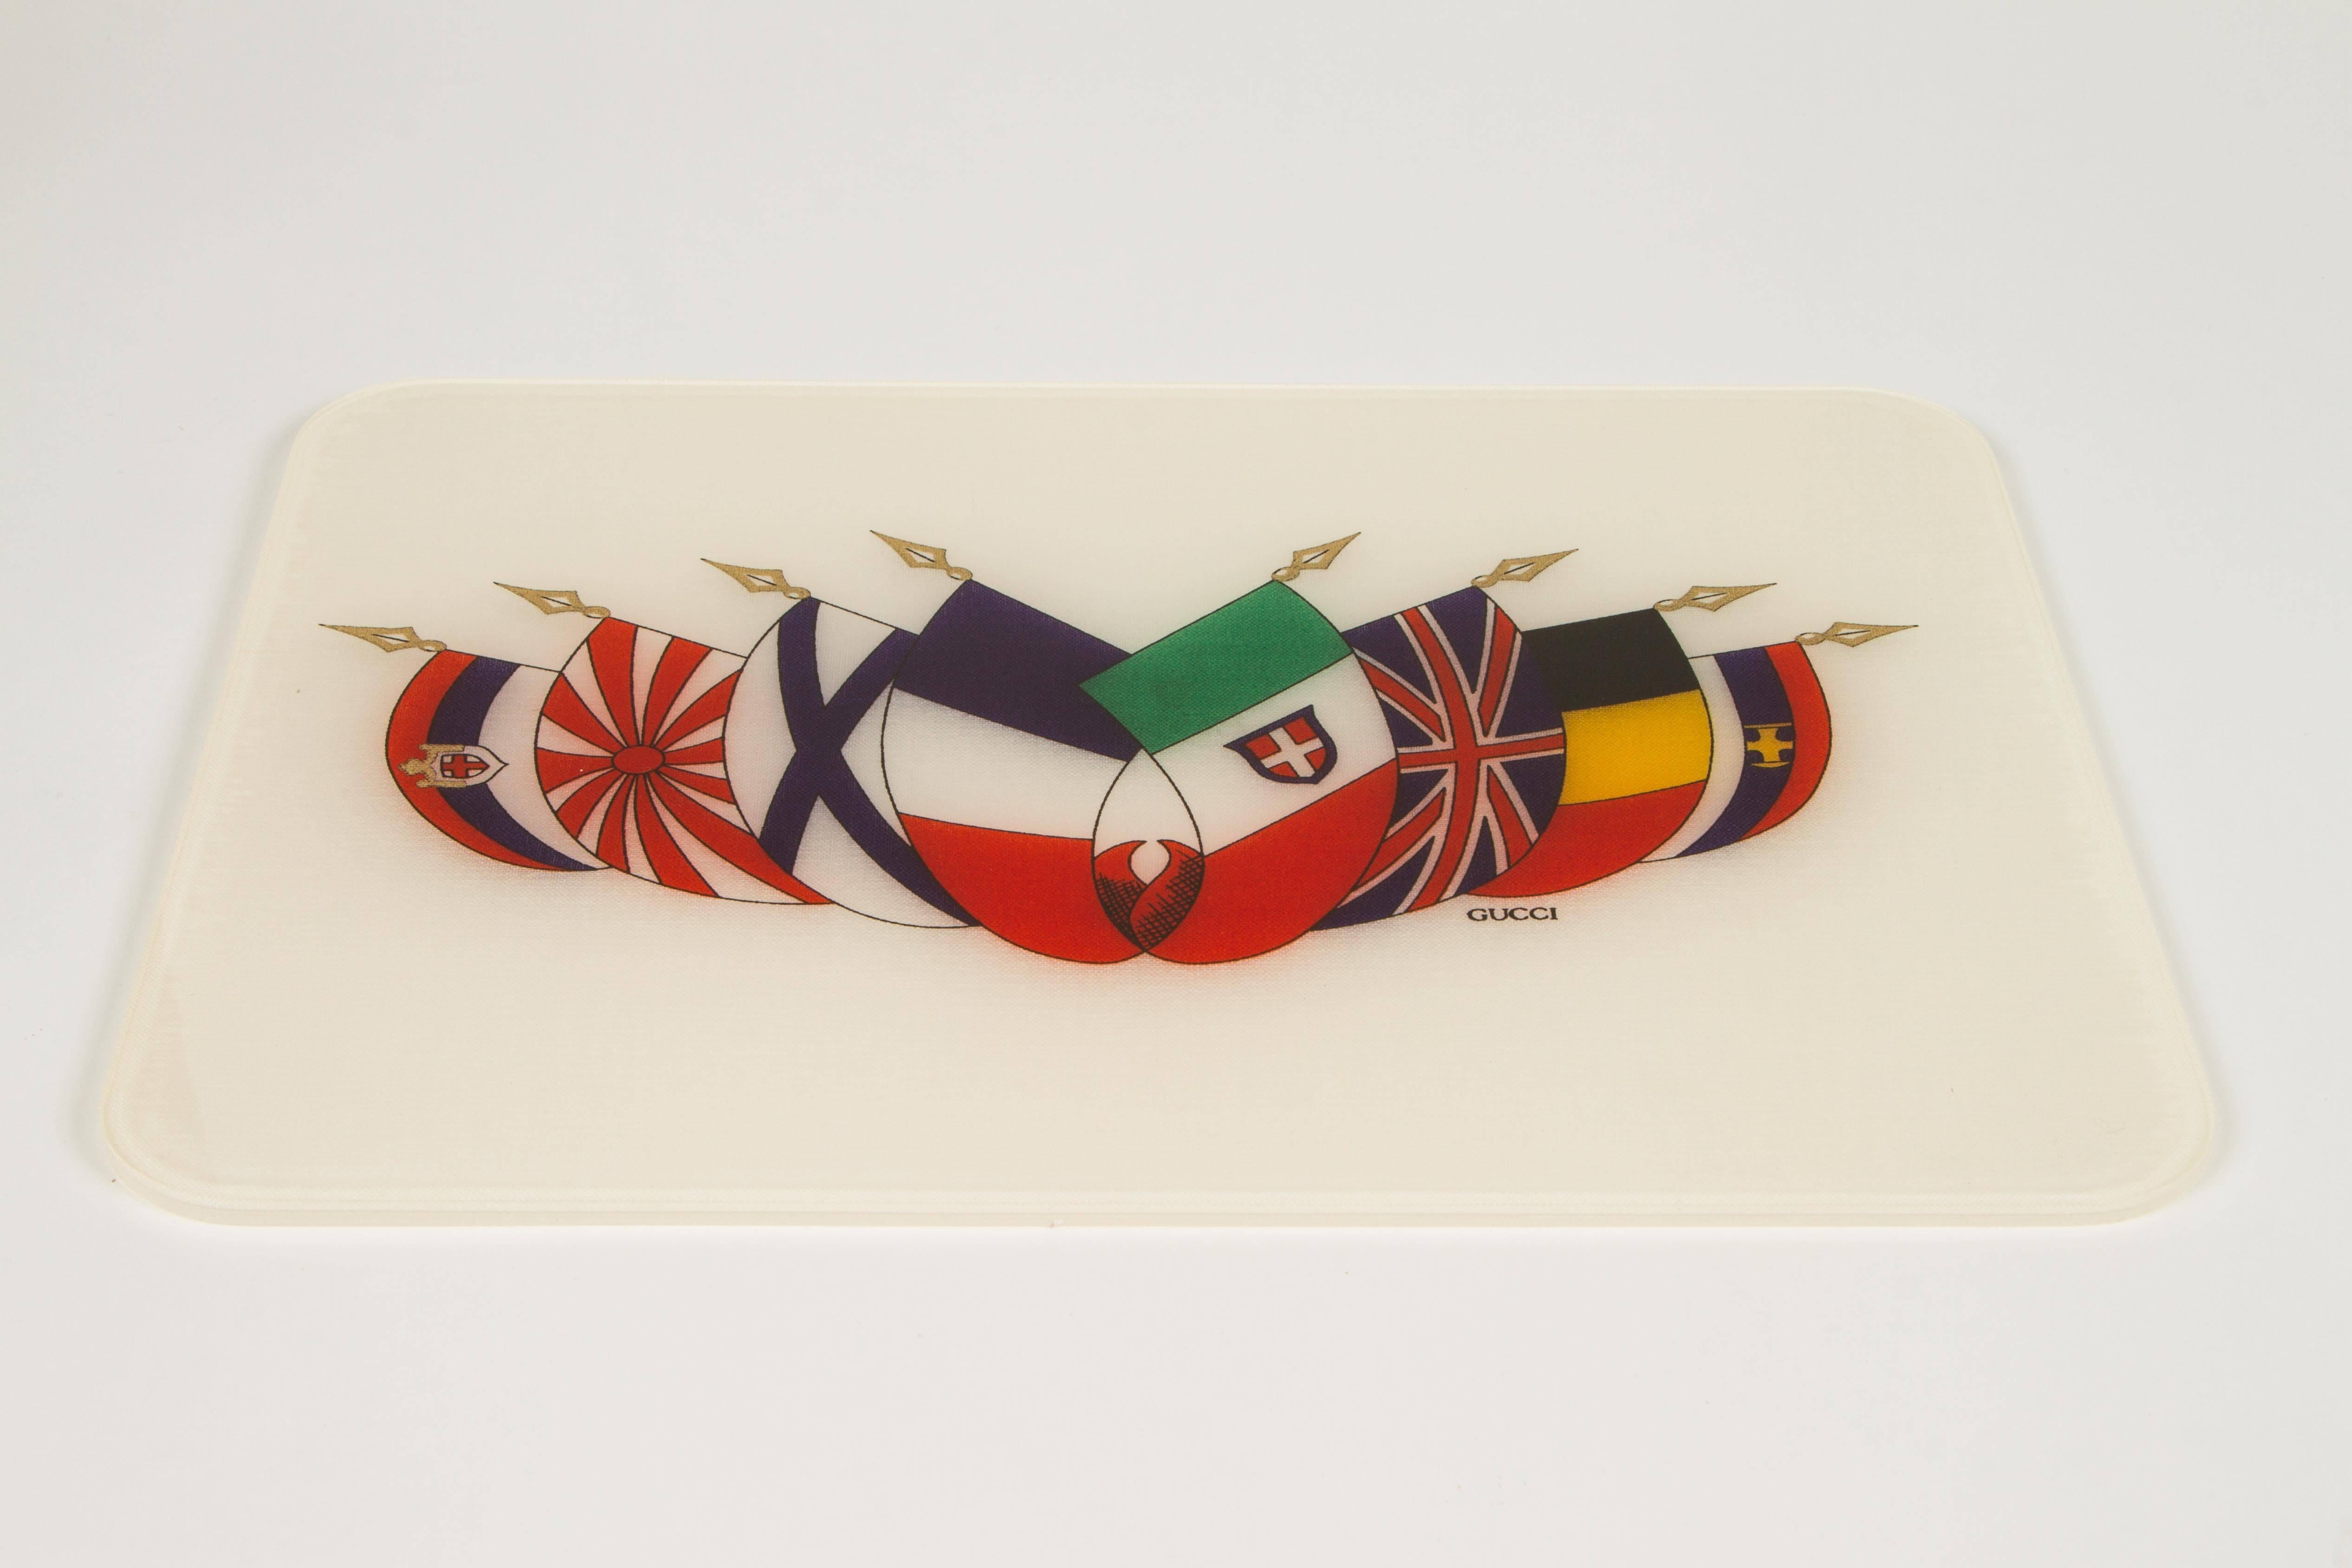 This is an awesome find! A group of 12 vintage Gucci placemats dating to the 1970s. These mats have a linen core printed with flags of various nations which are very colorful and striking. On the reverse the Gucci seal along with 